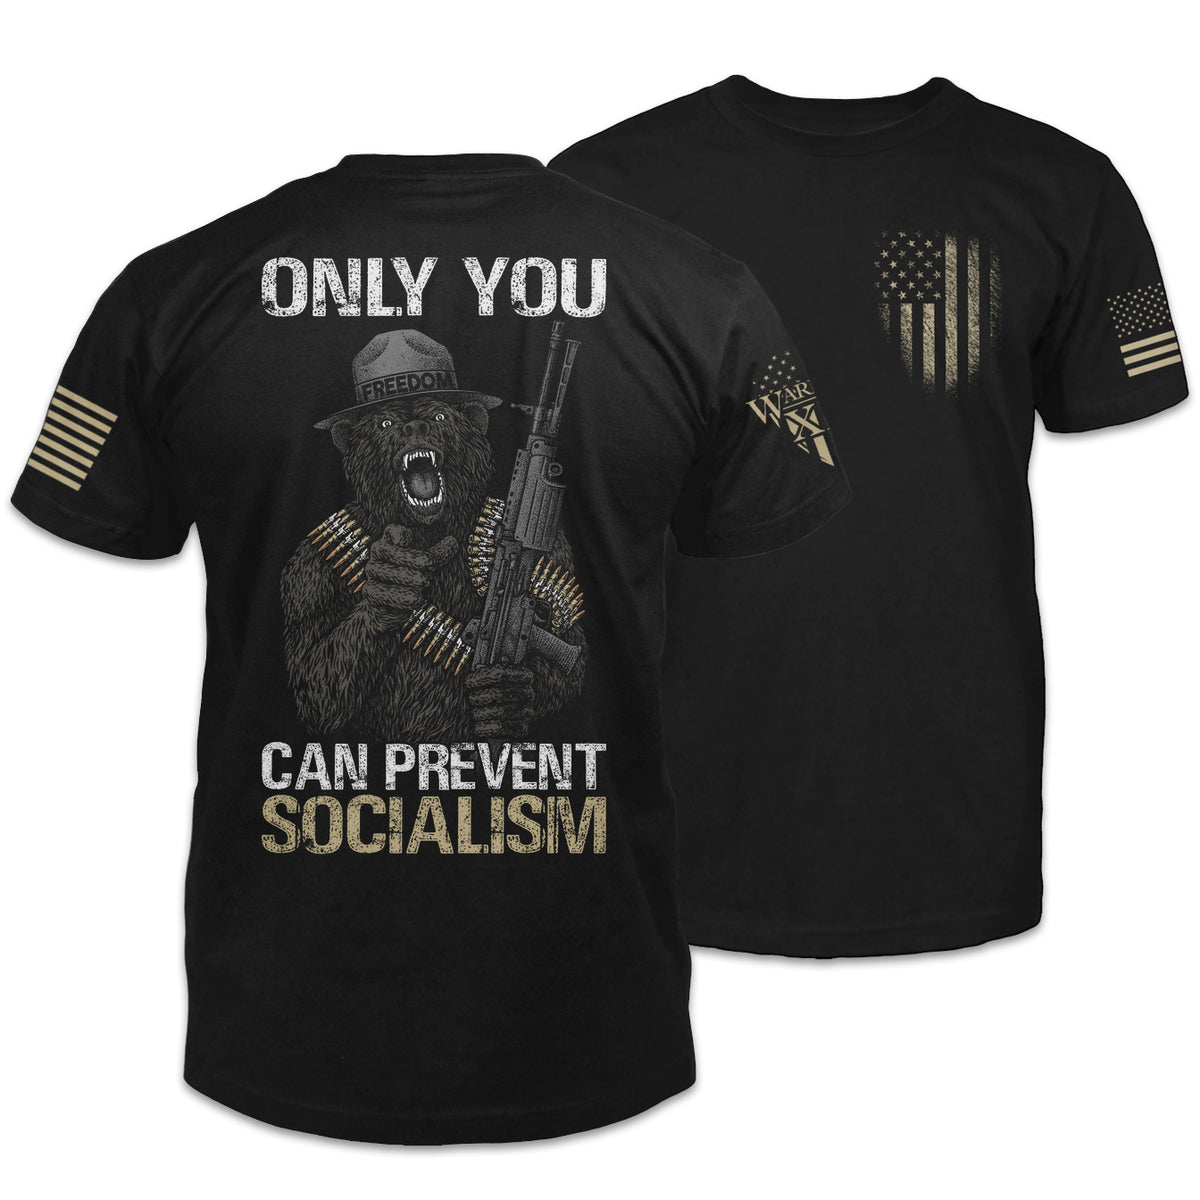 Front & back black t-shirt with the words "Only you can prevent socialism" with a gorilla holding a gun printed on the shirt.